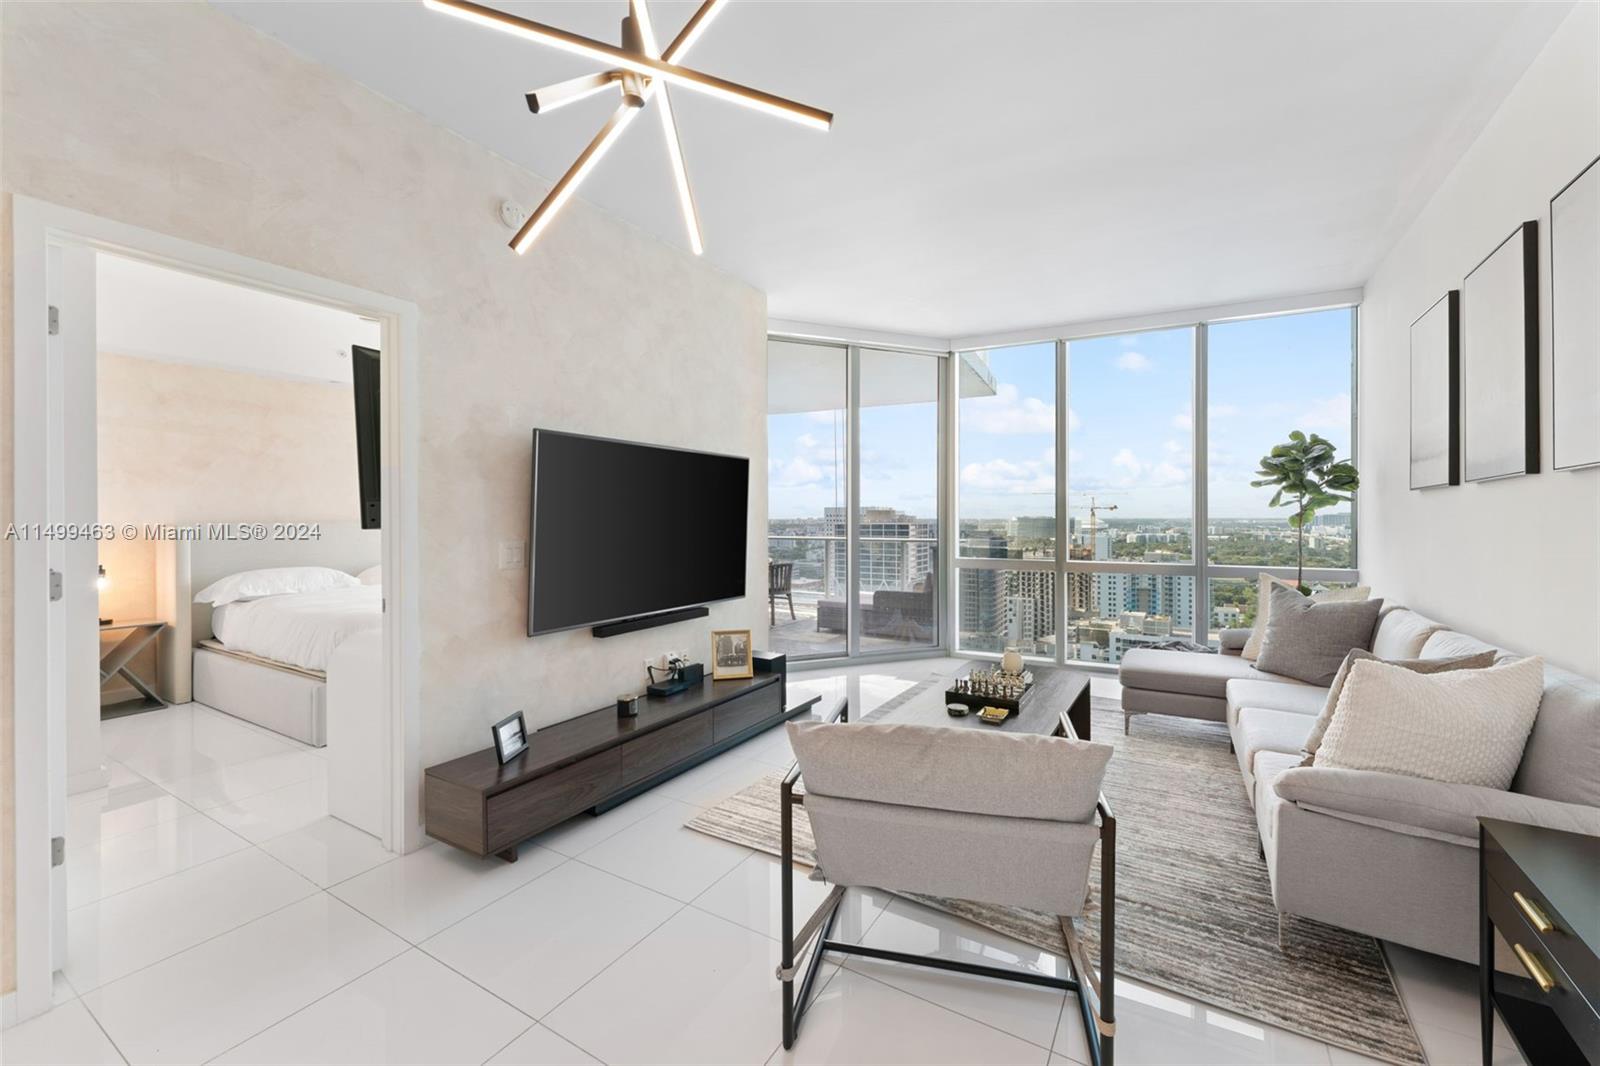 Experience elevated living at its finest in the highest 08’ line available at Paramount Miami World Center! Spacious 2 bedroom + Den with 3 bathrooms, Den can easily be converted into a 3rd room or an enclosed office space. The unit has a private elevator, unbelievable sunset views, and a deep 16x12 large balcony. Paramount is well known for its central location & as the most amenity-filled building in the world, just steps from the Kaseya Center (Miami Heat), minutes from the highway, and all of Miami’s main attractions. Exquisite amenities include five pools, gym with a boxing ring, game room, golf simulator, a half basketball court, a children’s play room, soccer field, tennis, spa, recording studio, market, rooftop pool w/ 360 views of Miami. Great investment opportunity! Easy to show!